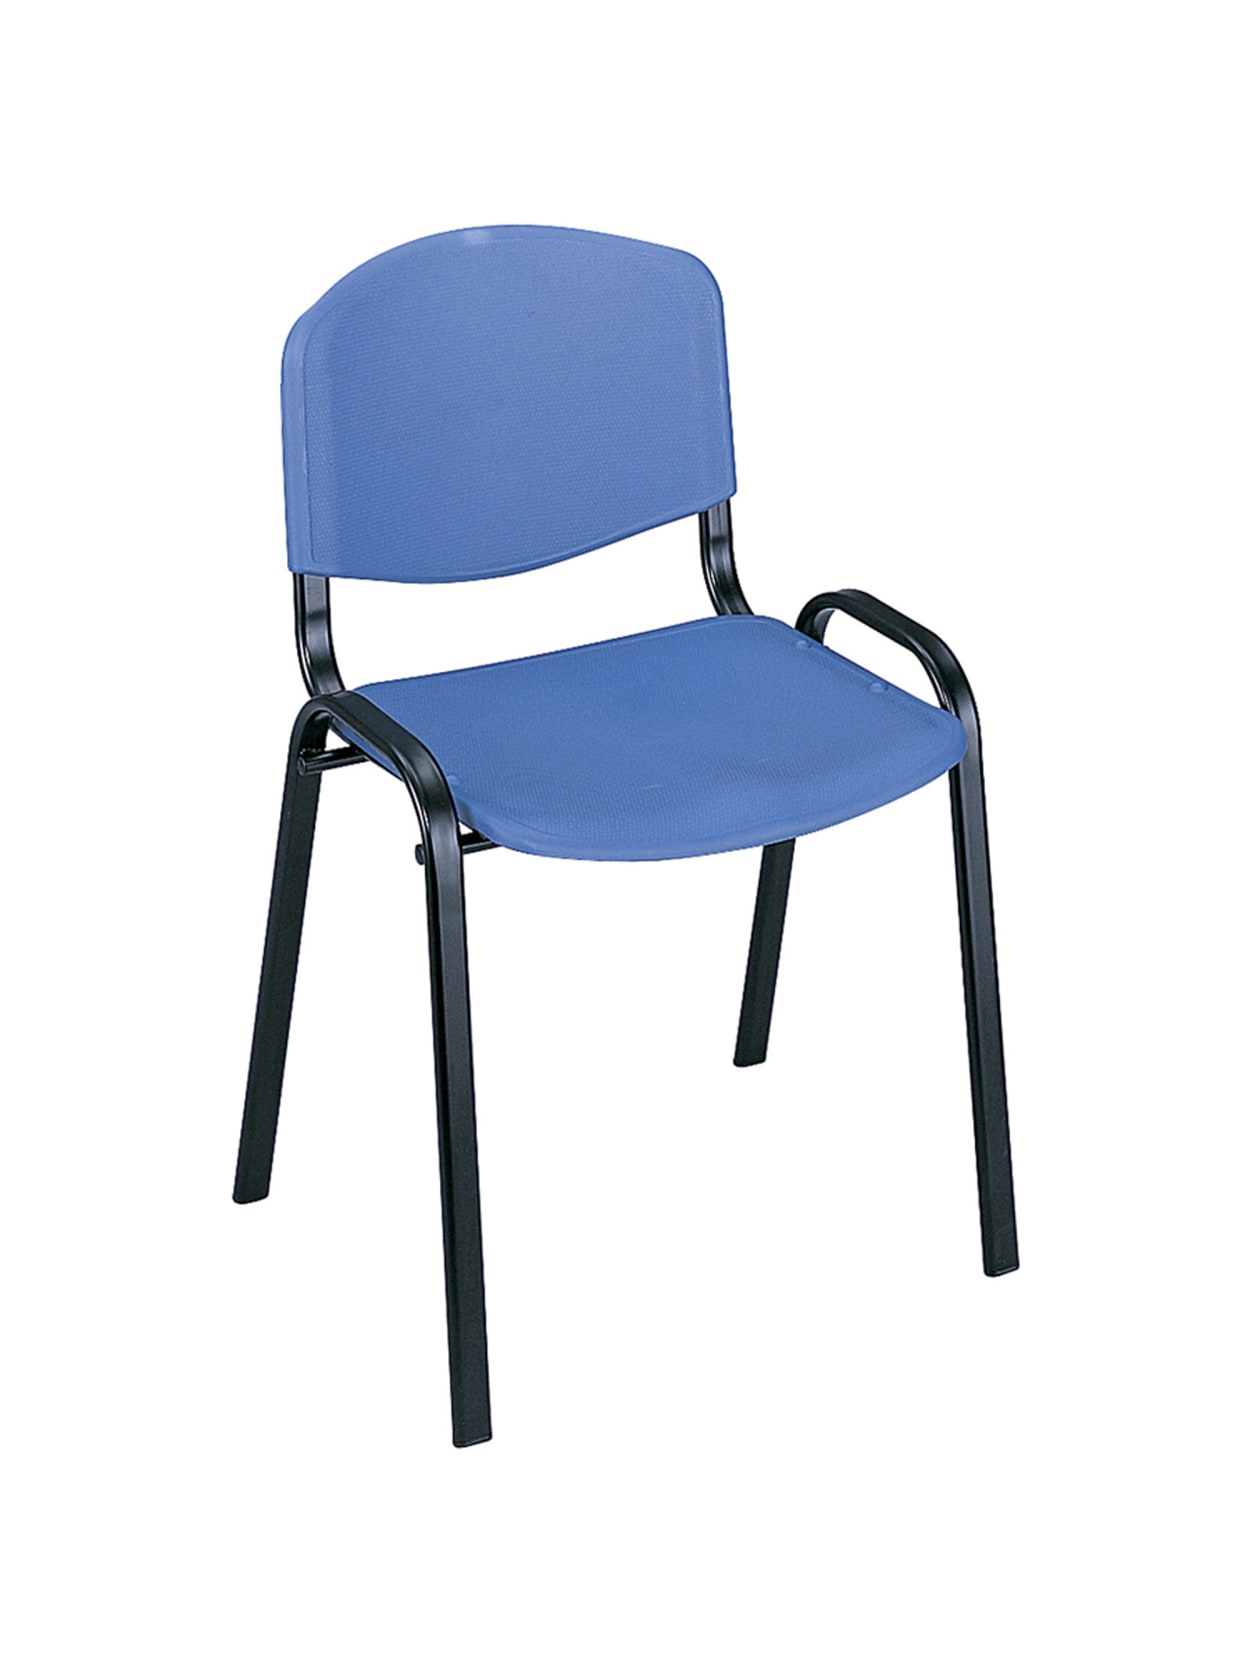 safco plastic seat plastic back stacking chair 18 12 seat